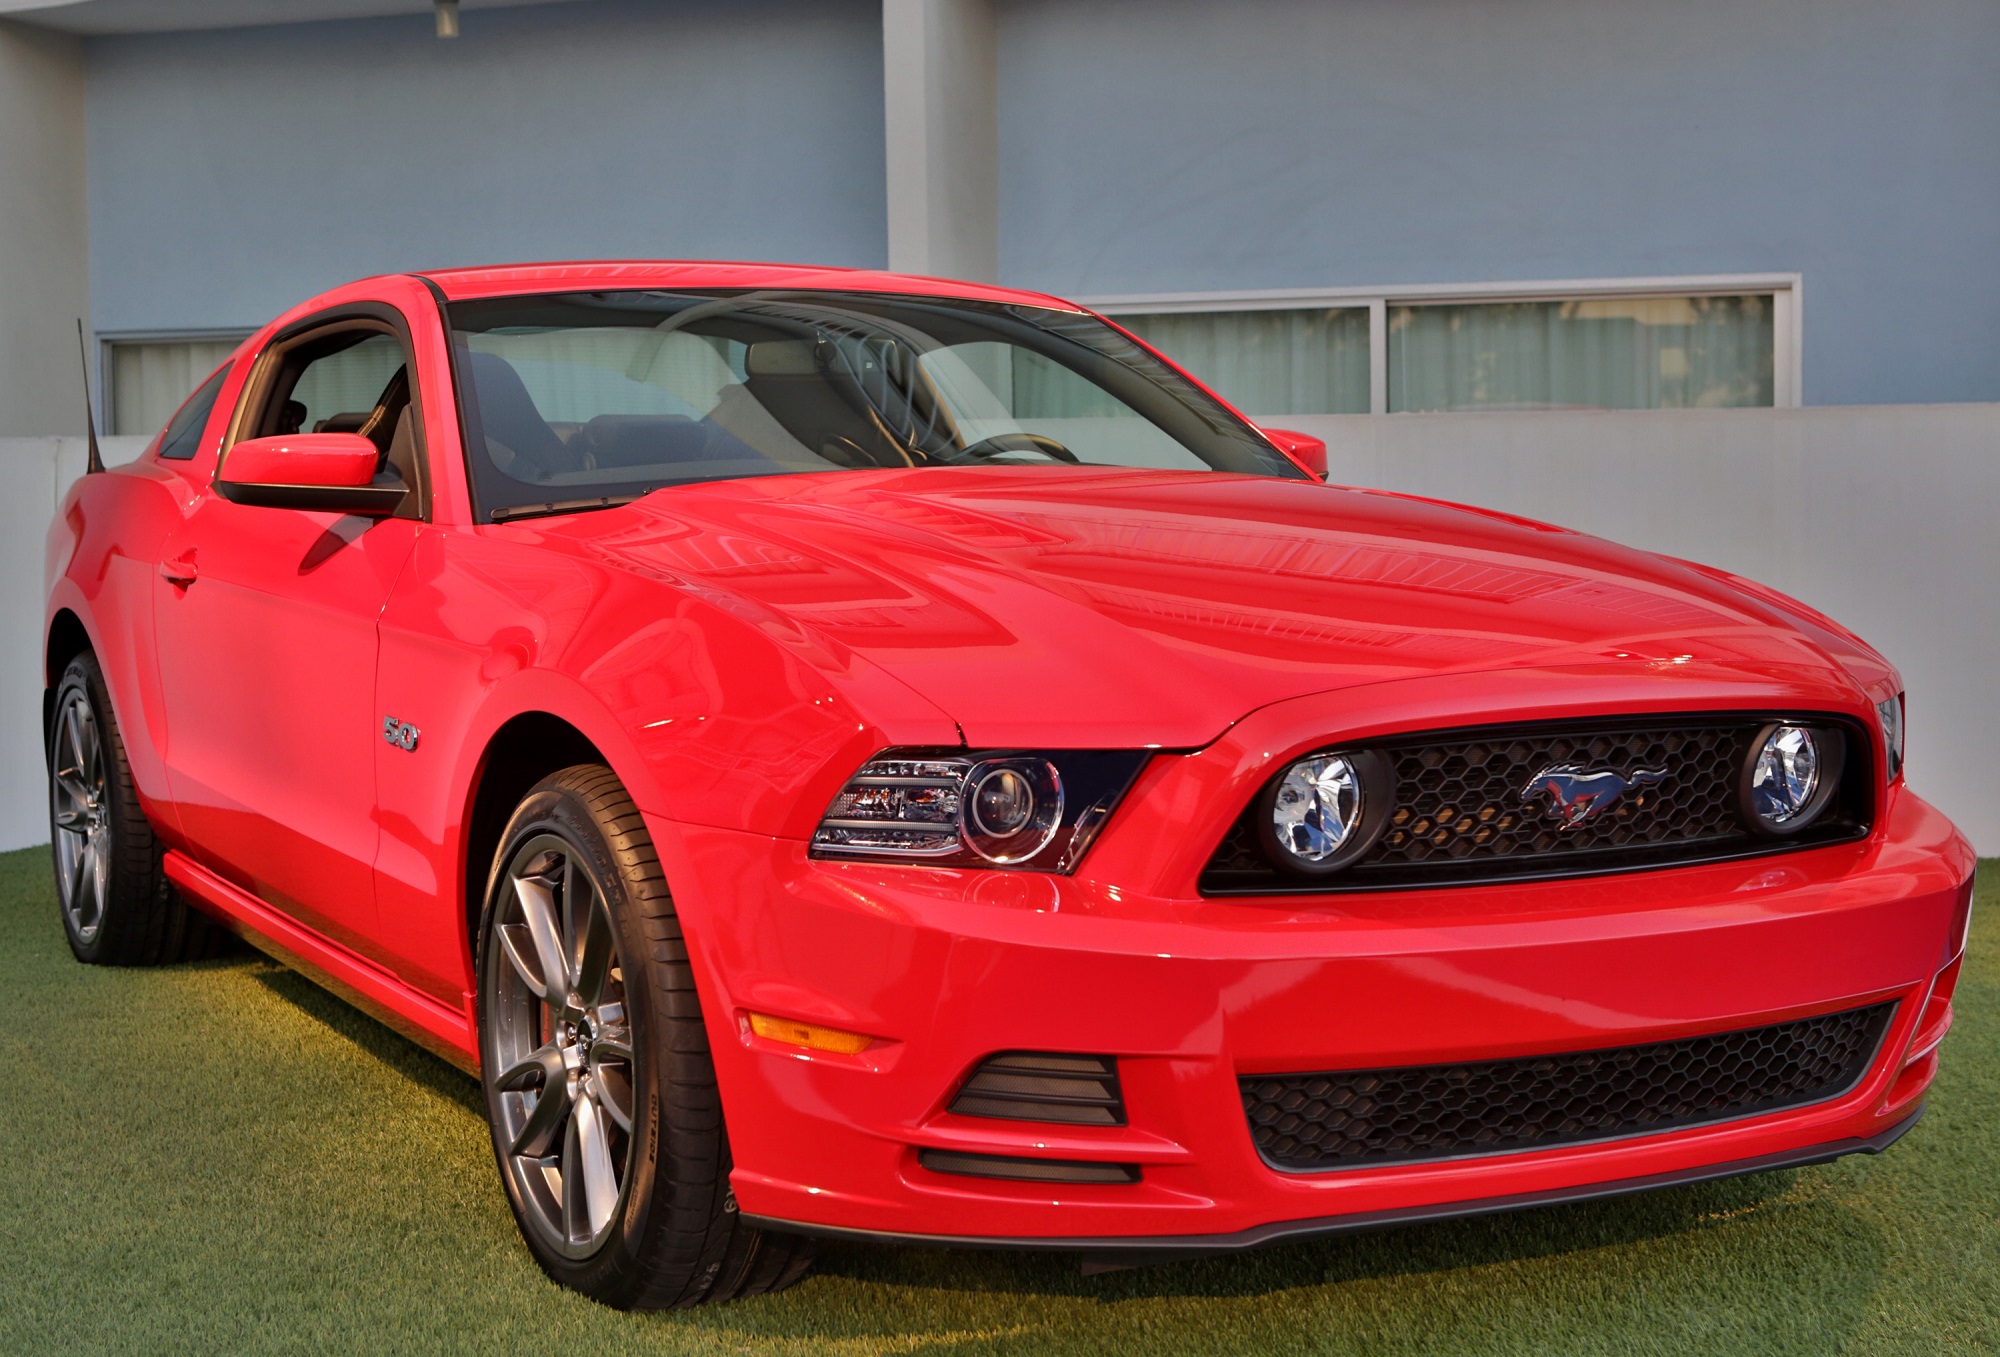 2014 Mustang GT: The Last S197 Is a Ford Mustang Performance Bargain